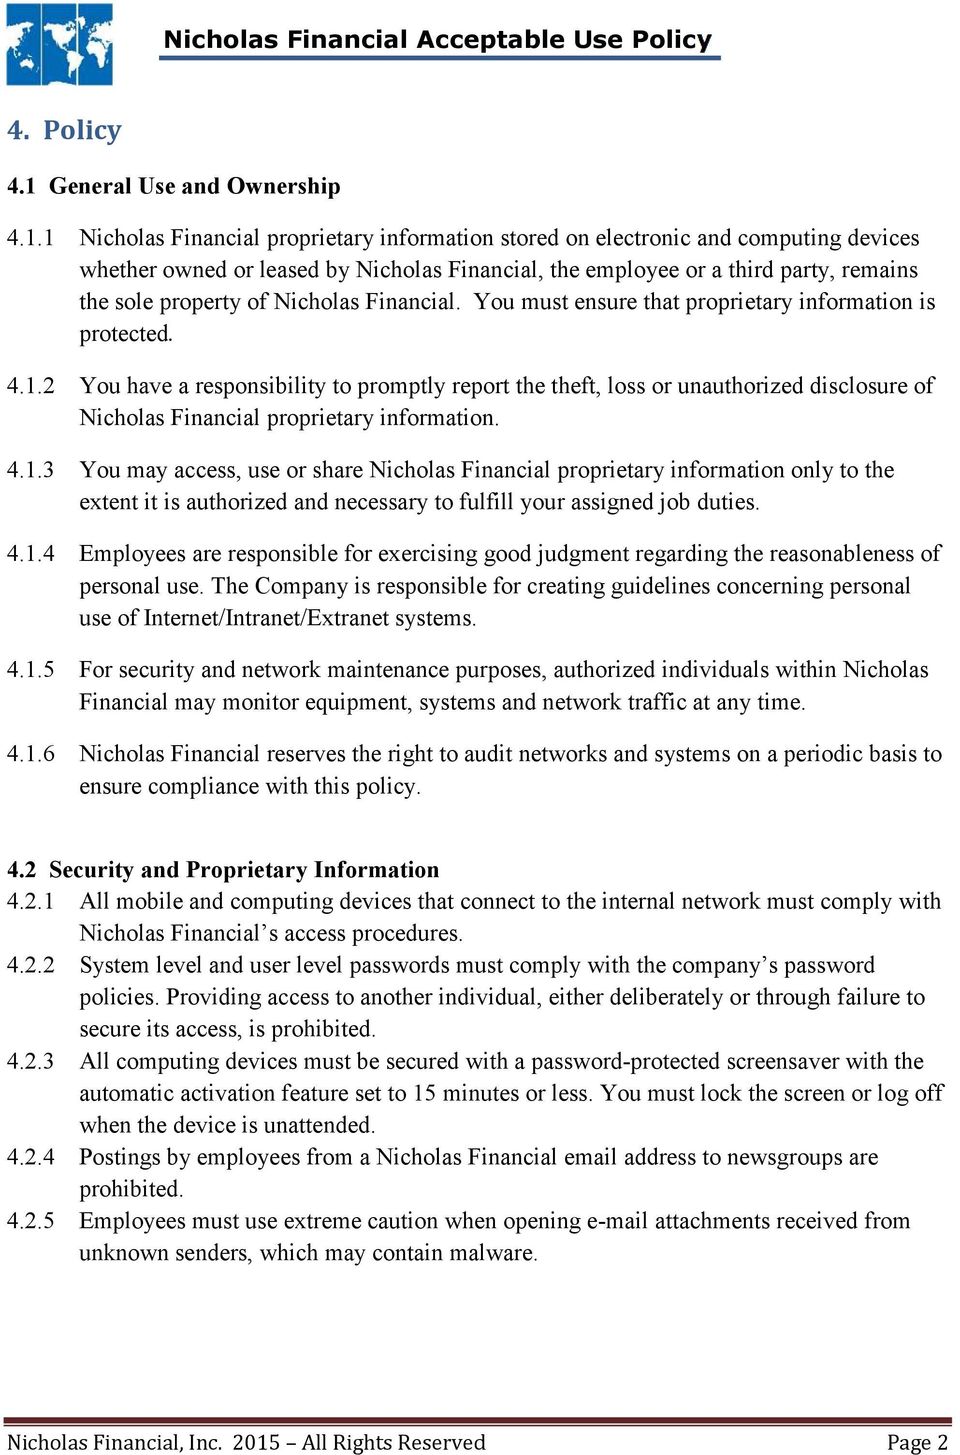 1 Nicholas Financial proprietary information stored on electronic and computing devices whether owned or leased by Nicholas Financial, the employee or a third party, remains the sole property of